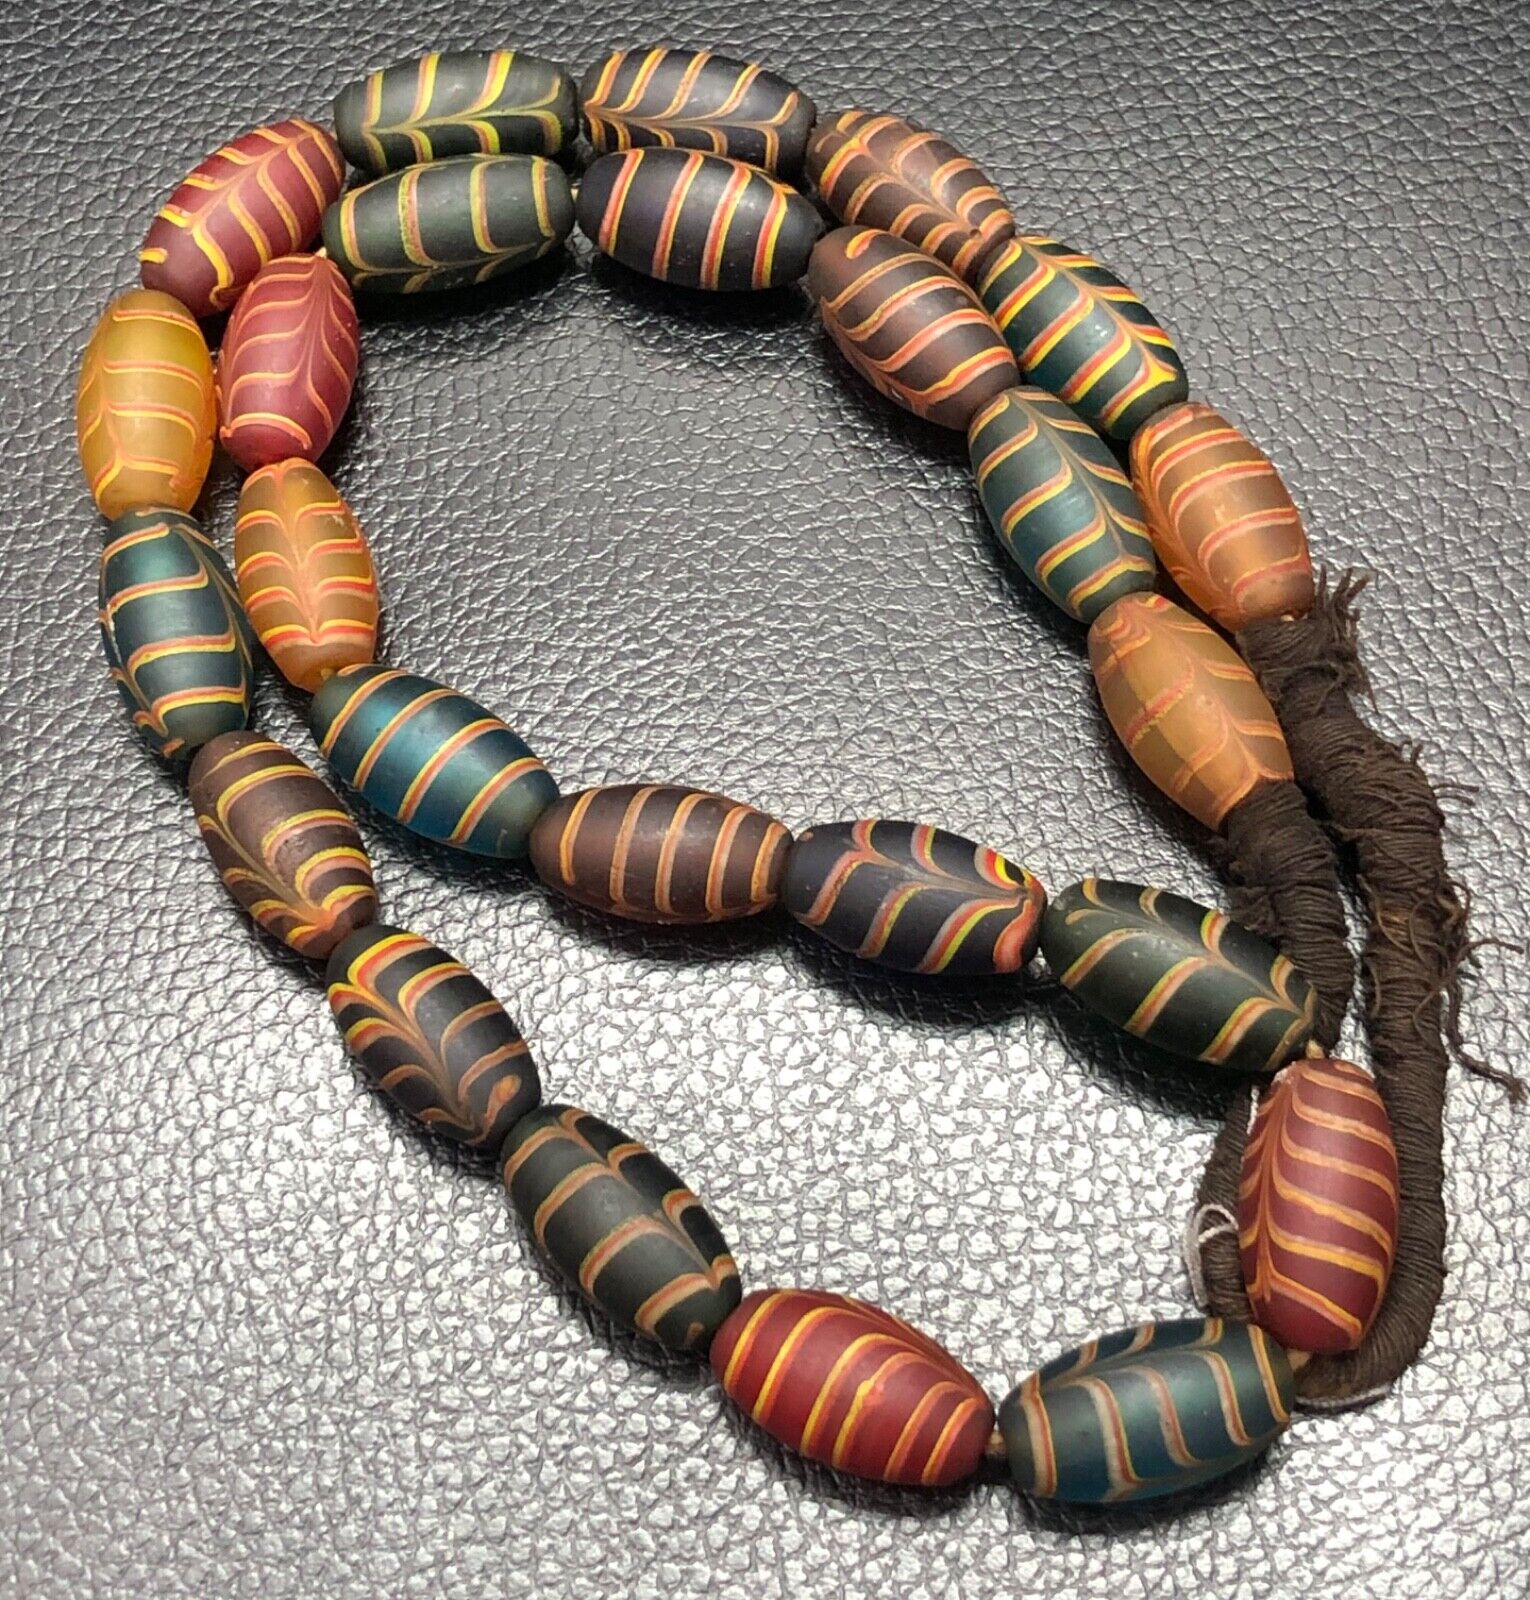 Vintage African Trade Glass Beads Strand, Beautiful Genuine Glass Beads 13mm